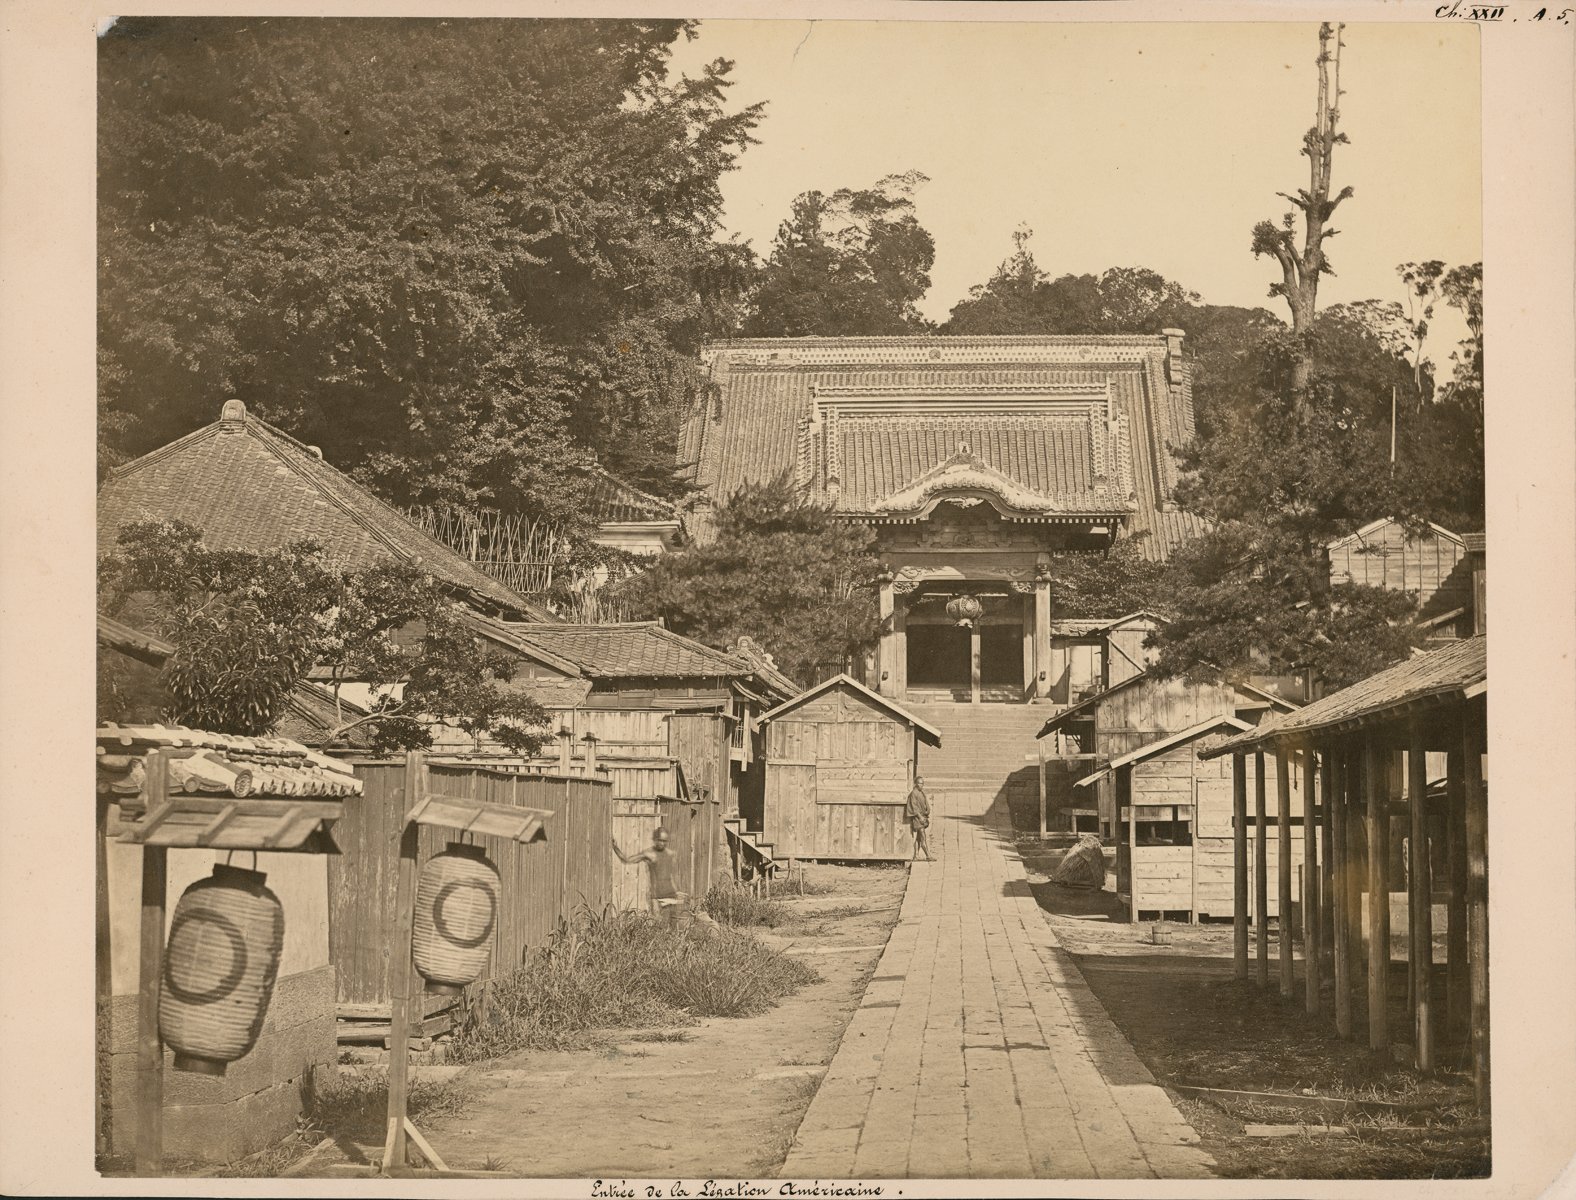 Japan in Early Photographs